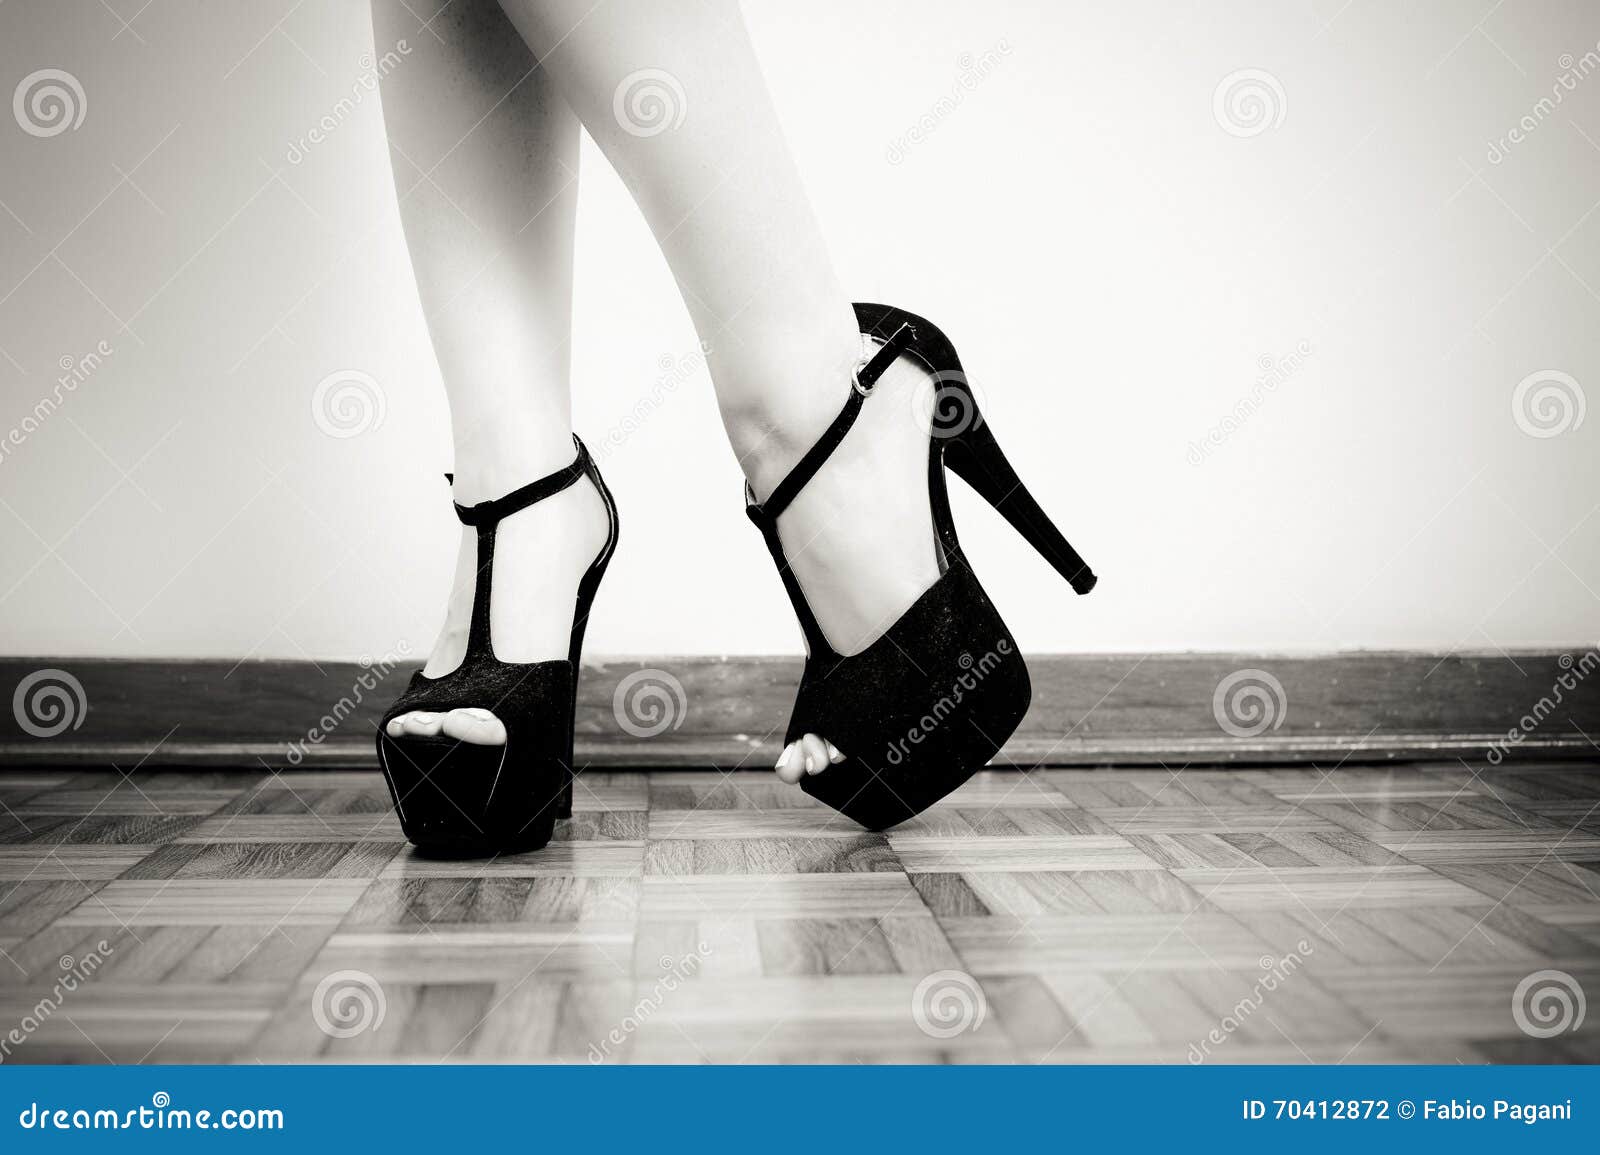 Black and White Photography, Picture, Woman in Heels, Black and White,  Print, Gallery Quality - Etsy